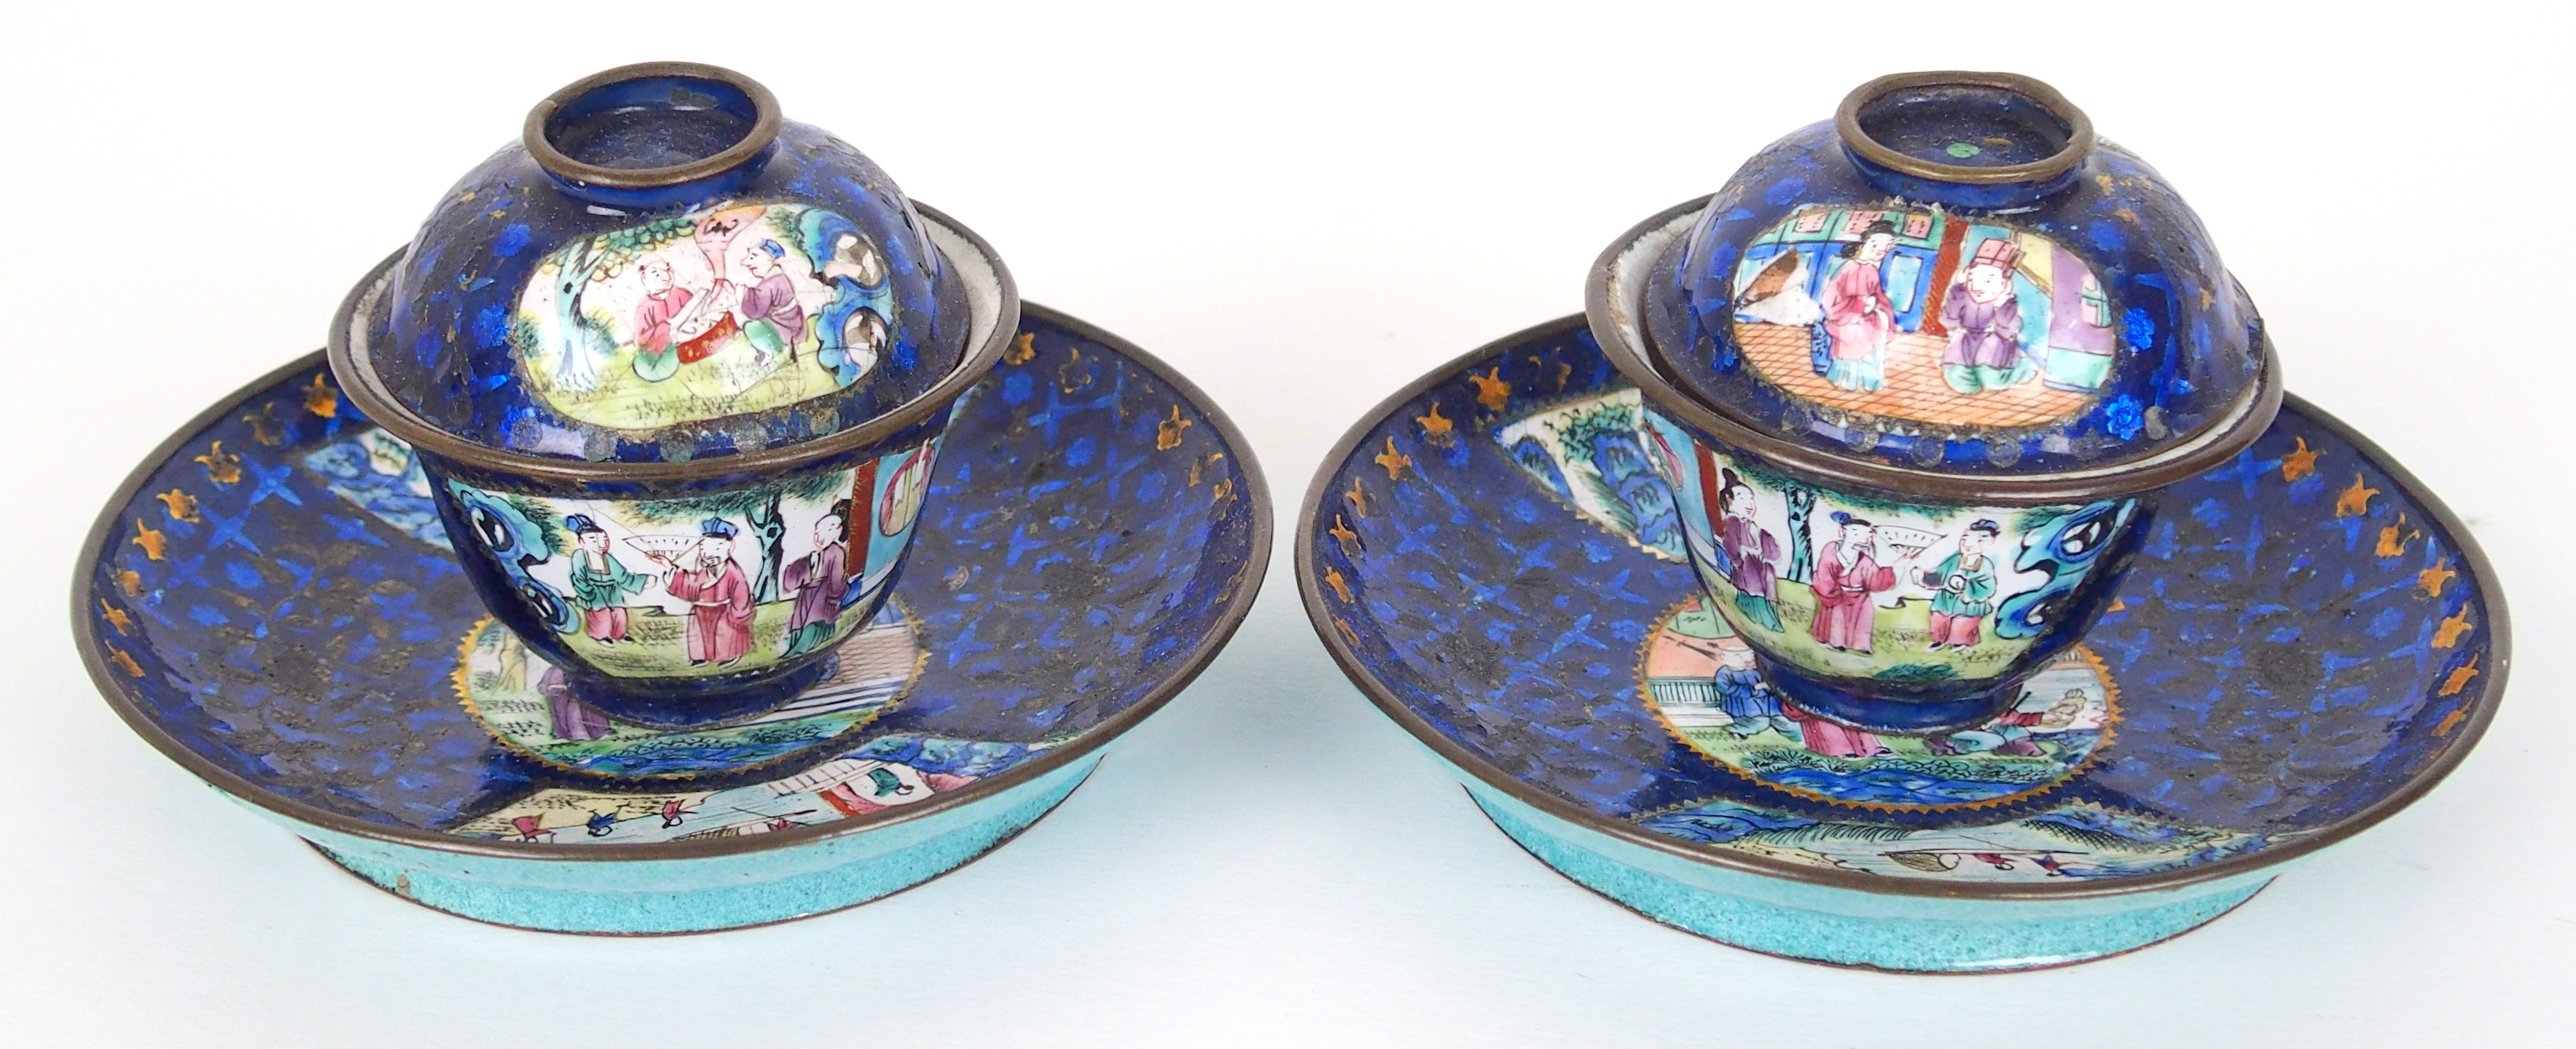 A pair of Canton enamel teabowls covers and saucers painted with figures on balconies on a blue